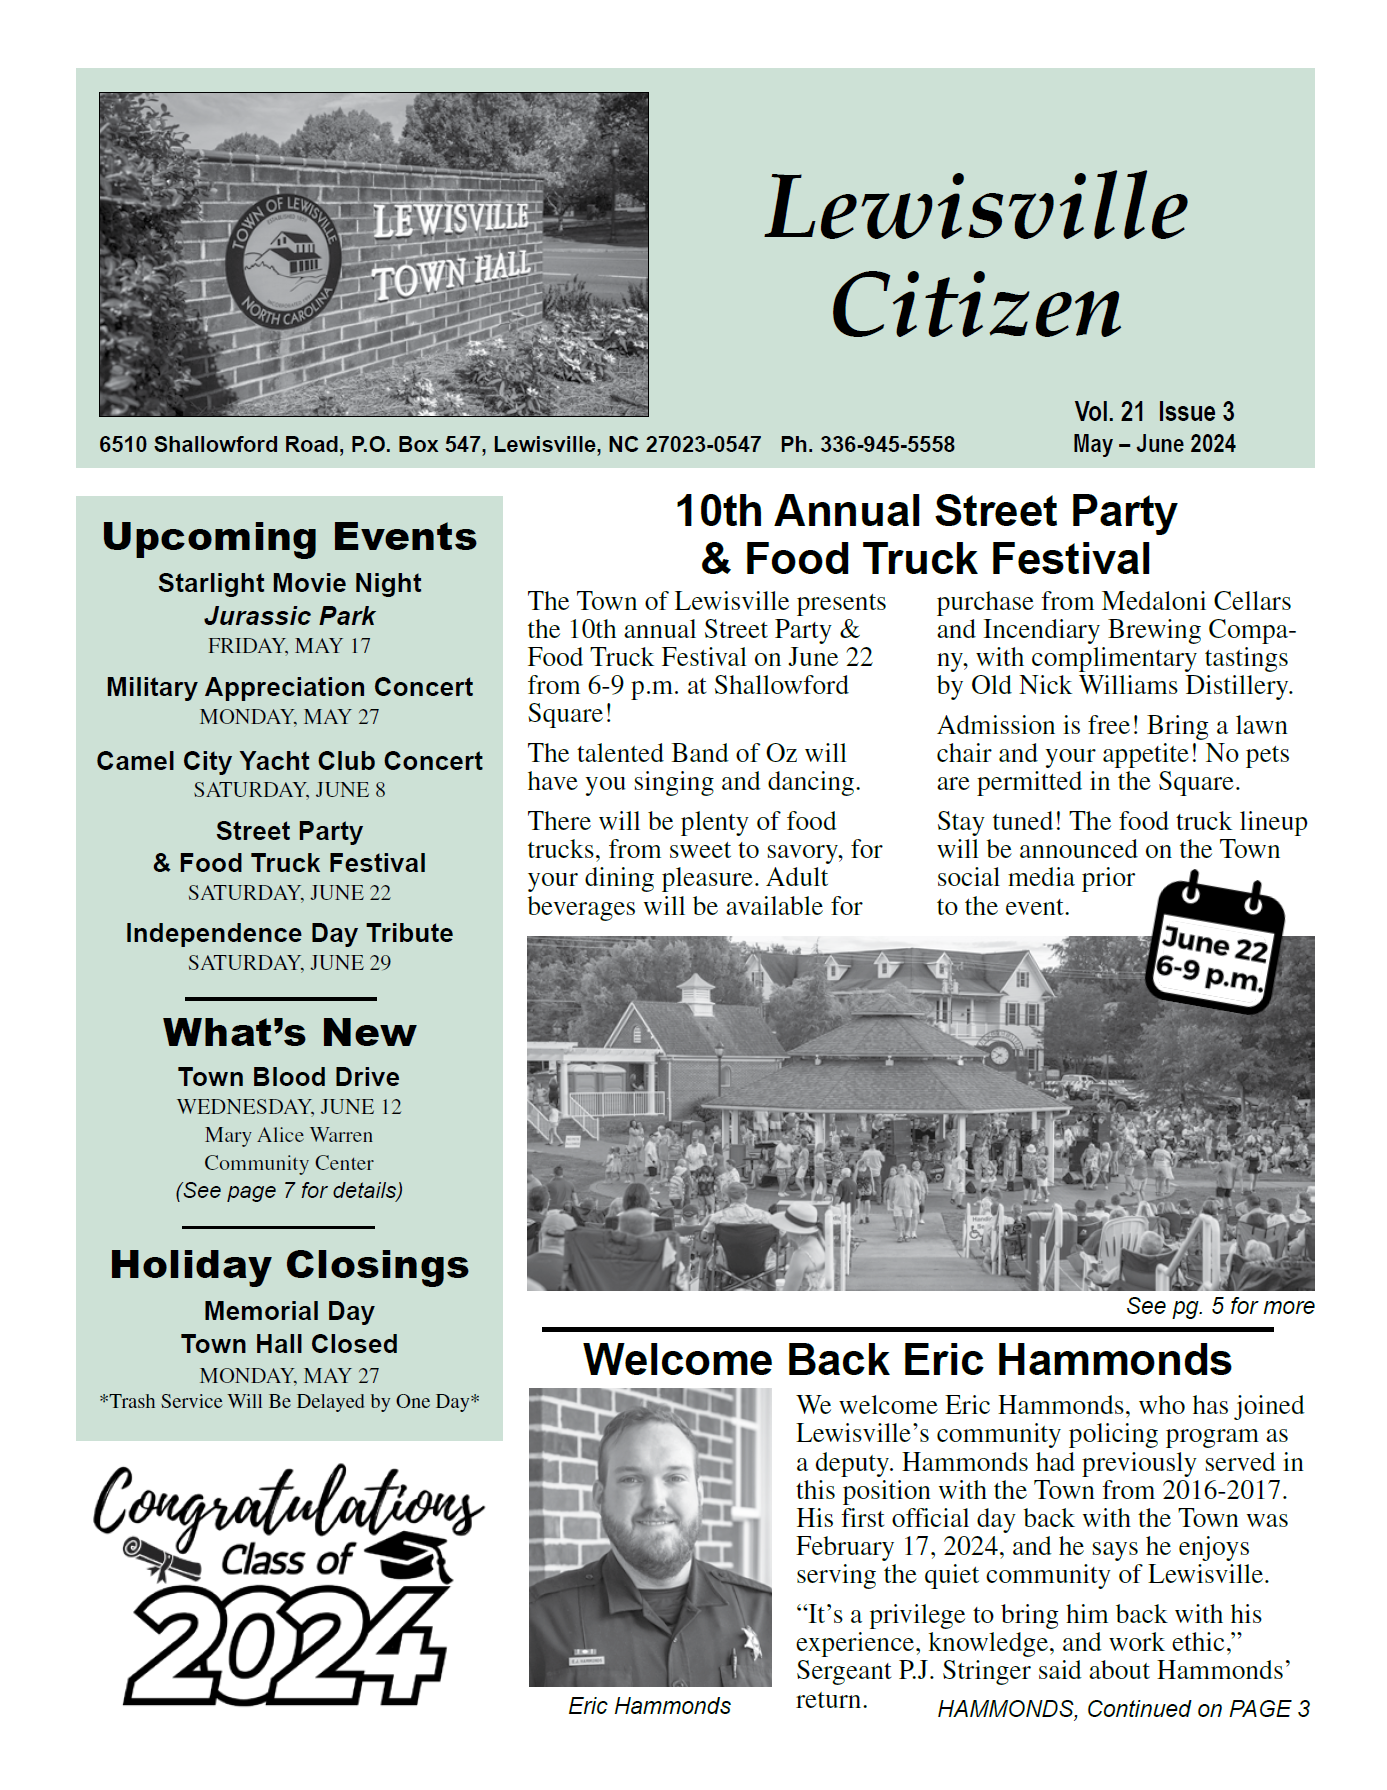 Lewisville Citizen Vol. 21 Issue 3 Cover Page